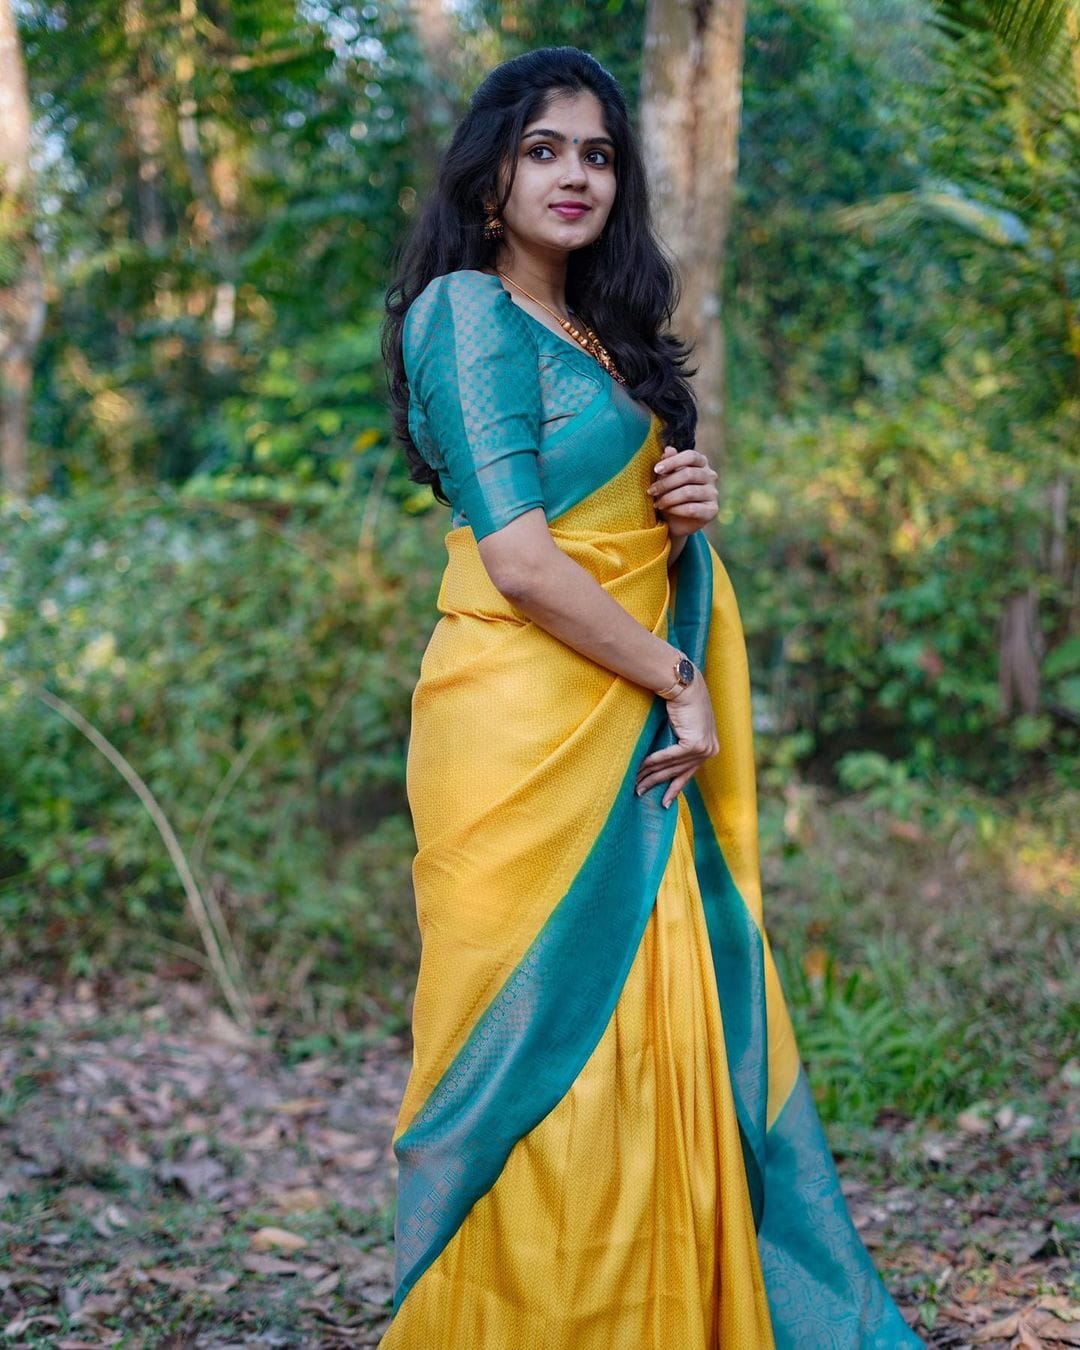 Presenting Yellow Color Saree With Sky Blue Border